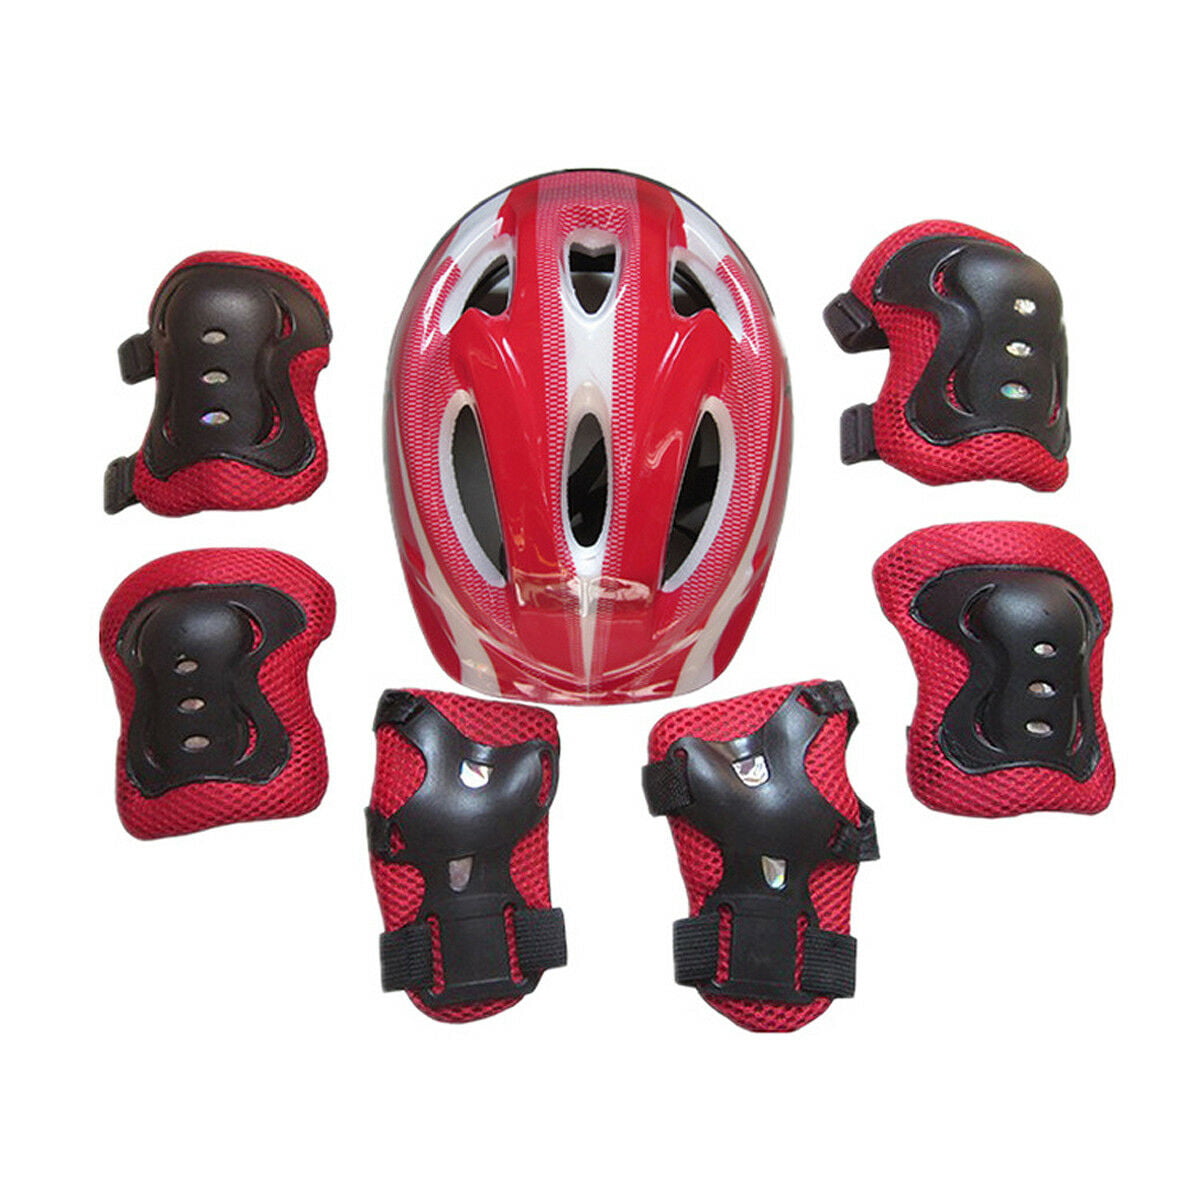 Children Sports Protective Gear Thicken Safety Pad Knee Elbow Wrist Support Pads Helmet Skateboard Protector for Age 3 to 12 Red 7pcs